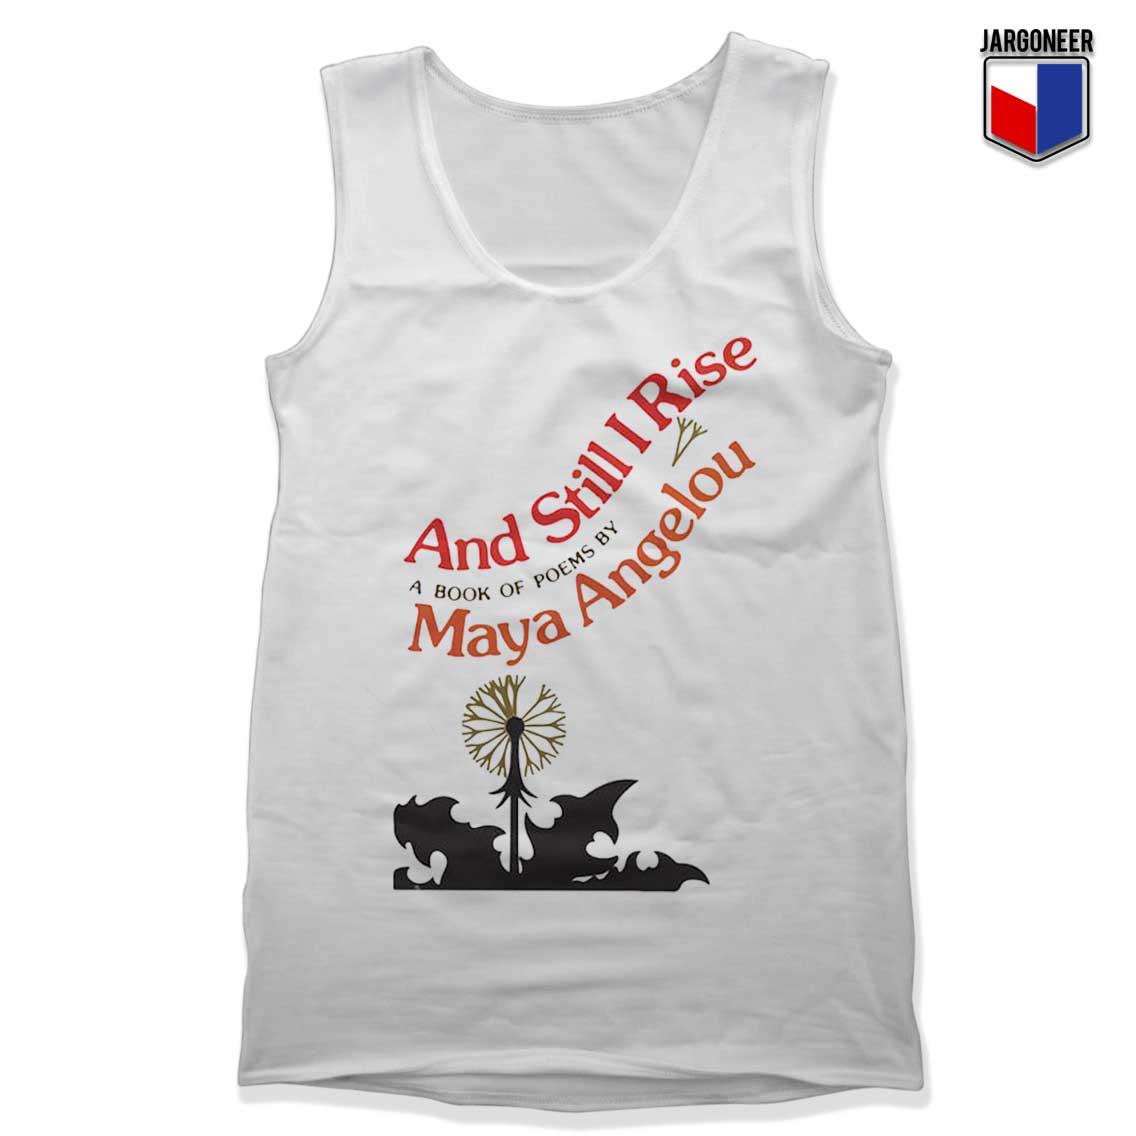 And Still I Rise Tank Top - Shop Unique Graphic Cool Shirt Designs